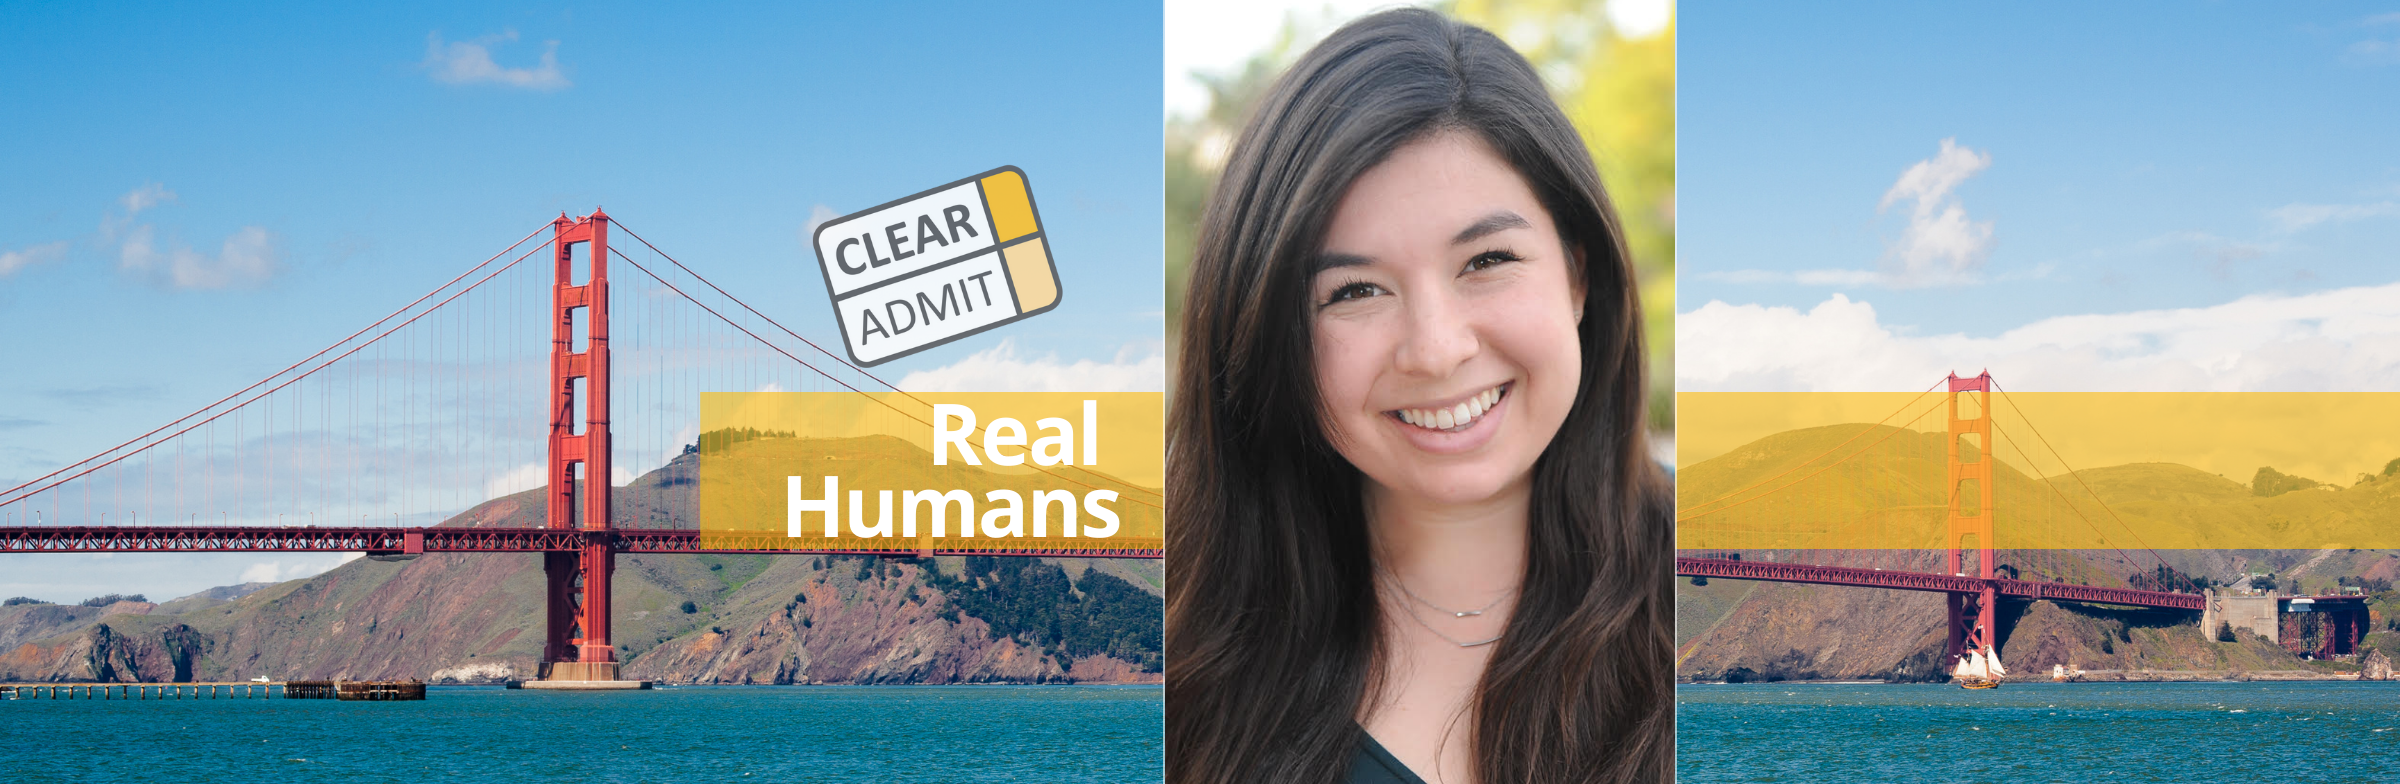 Image for Real Humans of BCG: Valerie Jadulang, USC Marshall MBA ’18, Project Leader